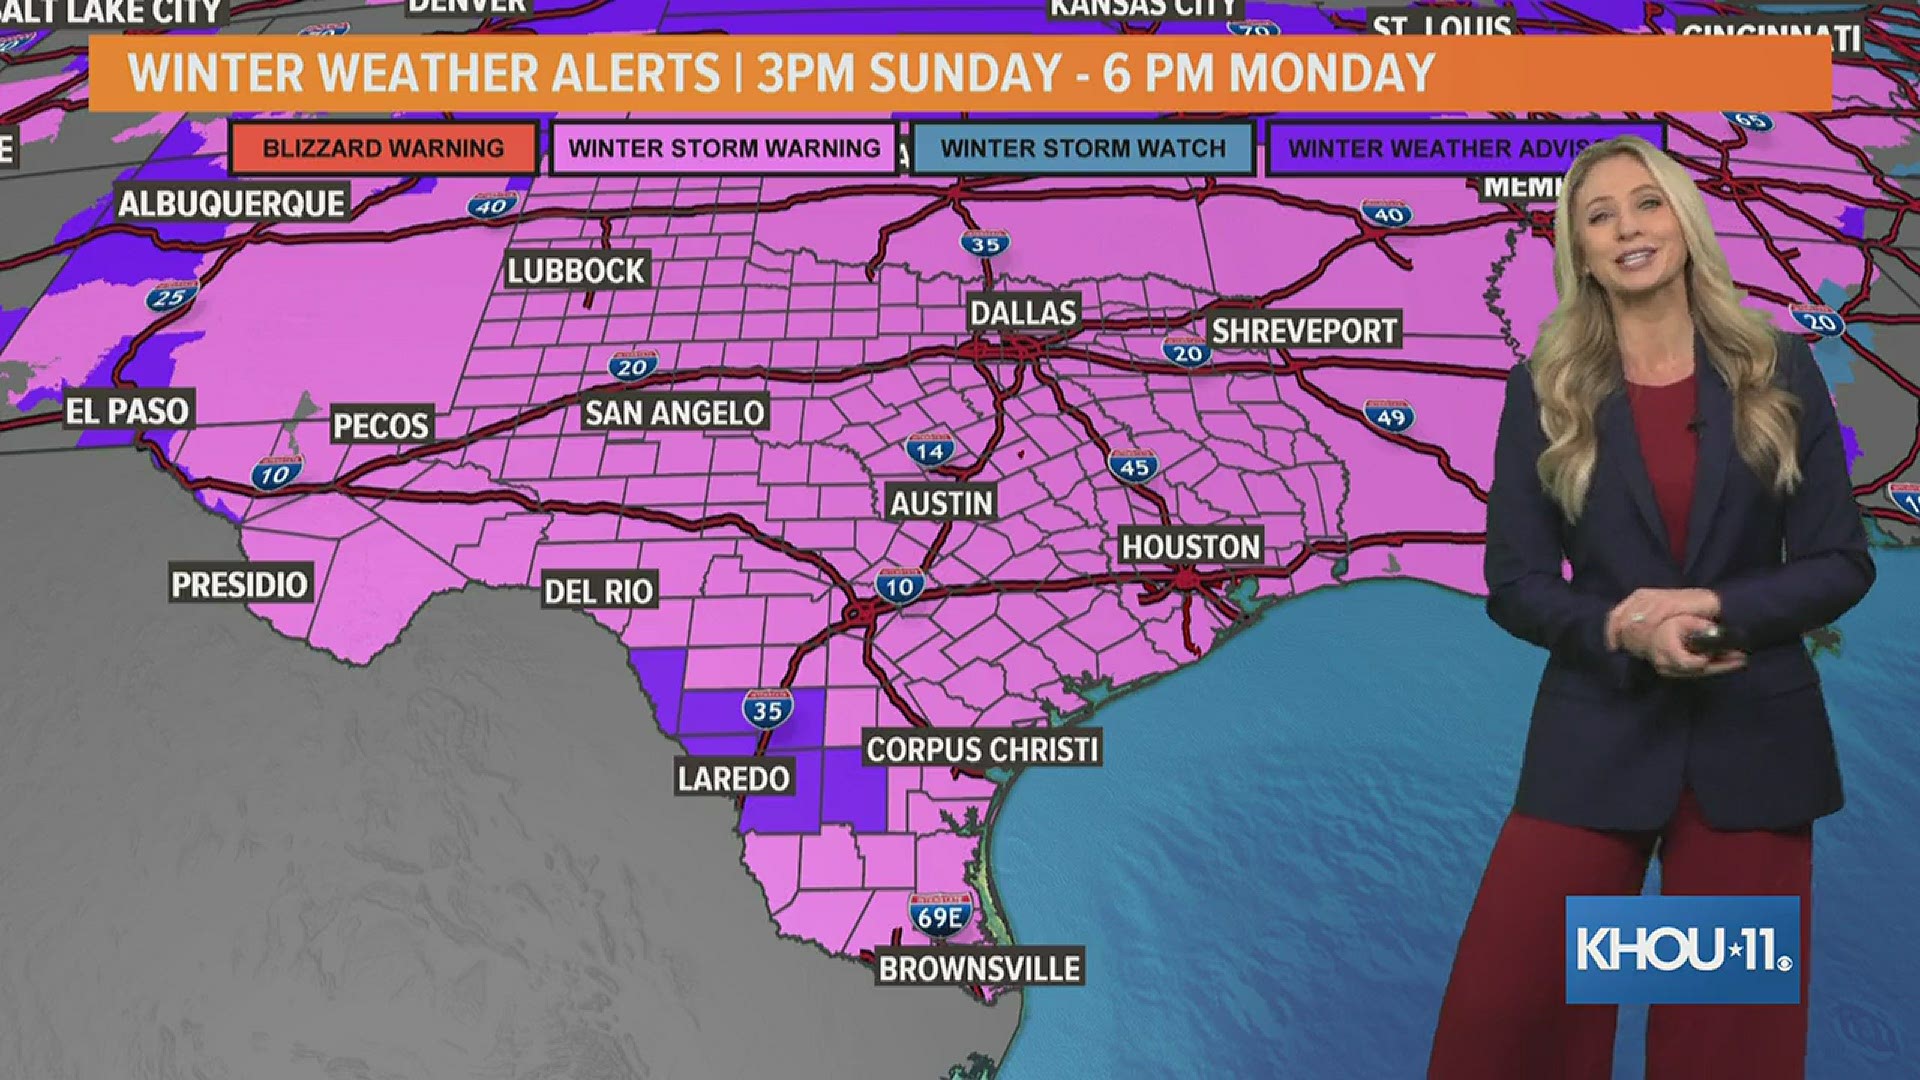 KHOUI 11 Meteorologist Chita Craft is tracking a winter storm heading to the Houston area today (2/14)